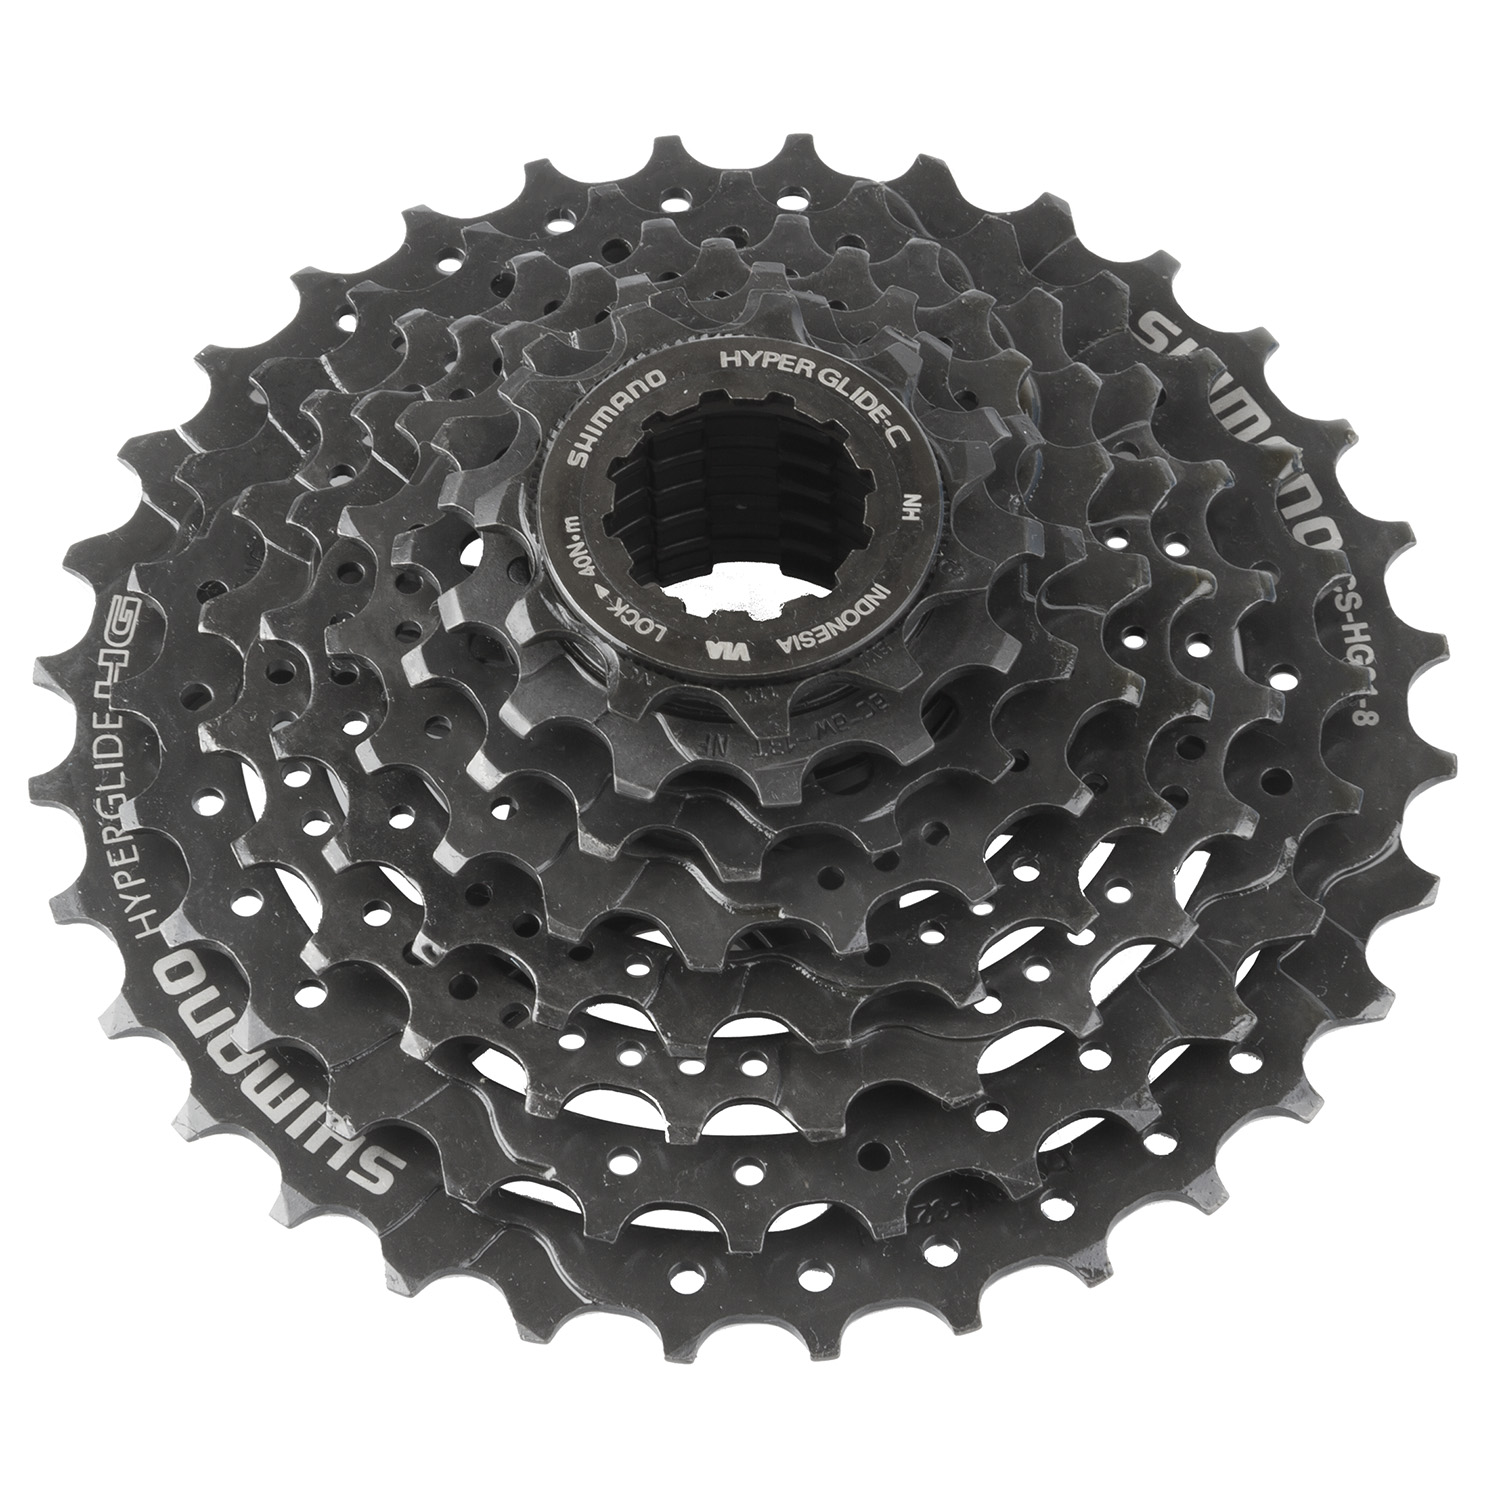 Yup theory Shopping Centre SHIMANO CS-HG31 cassette sprocket | Messingschlager